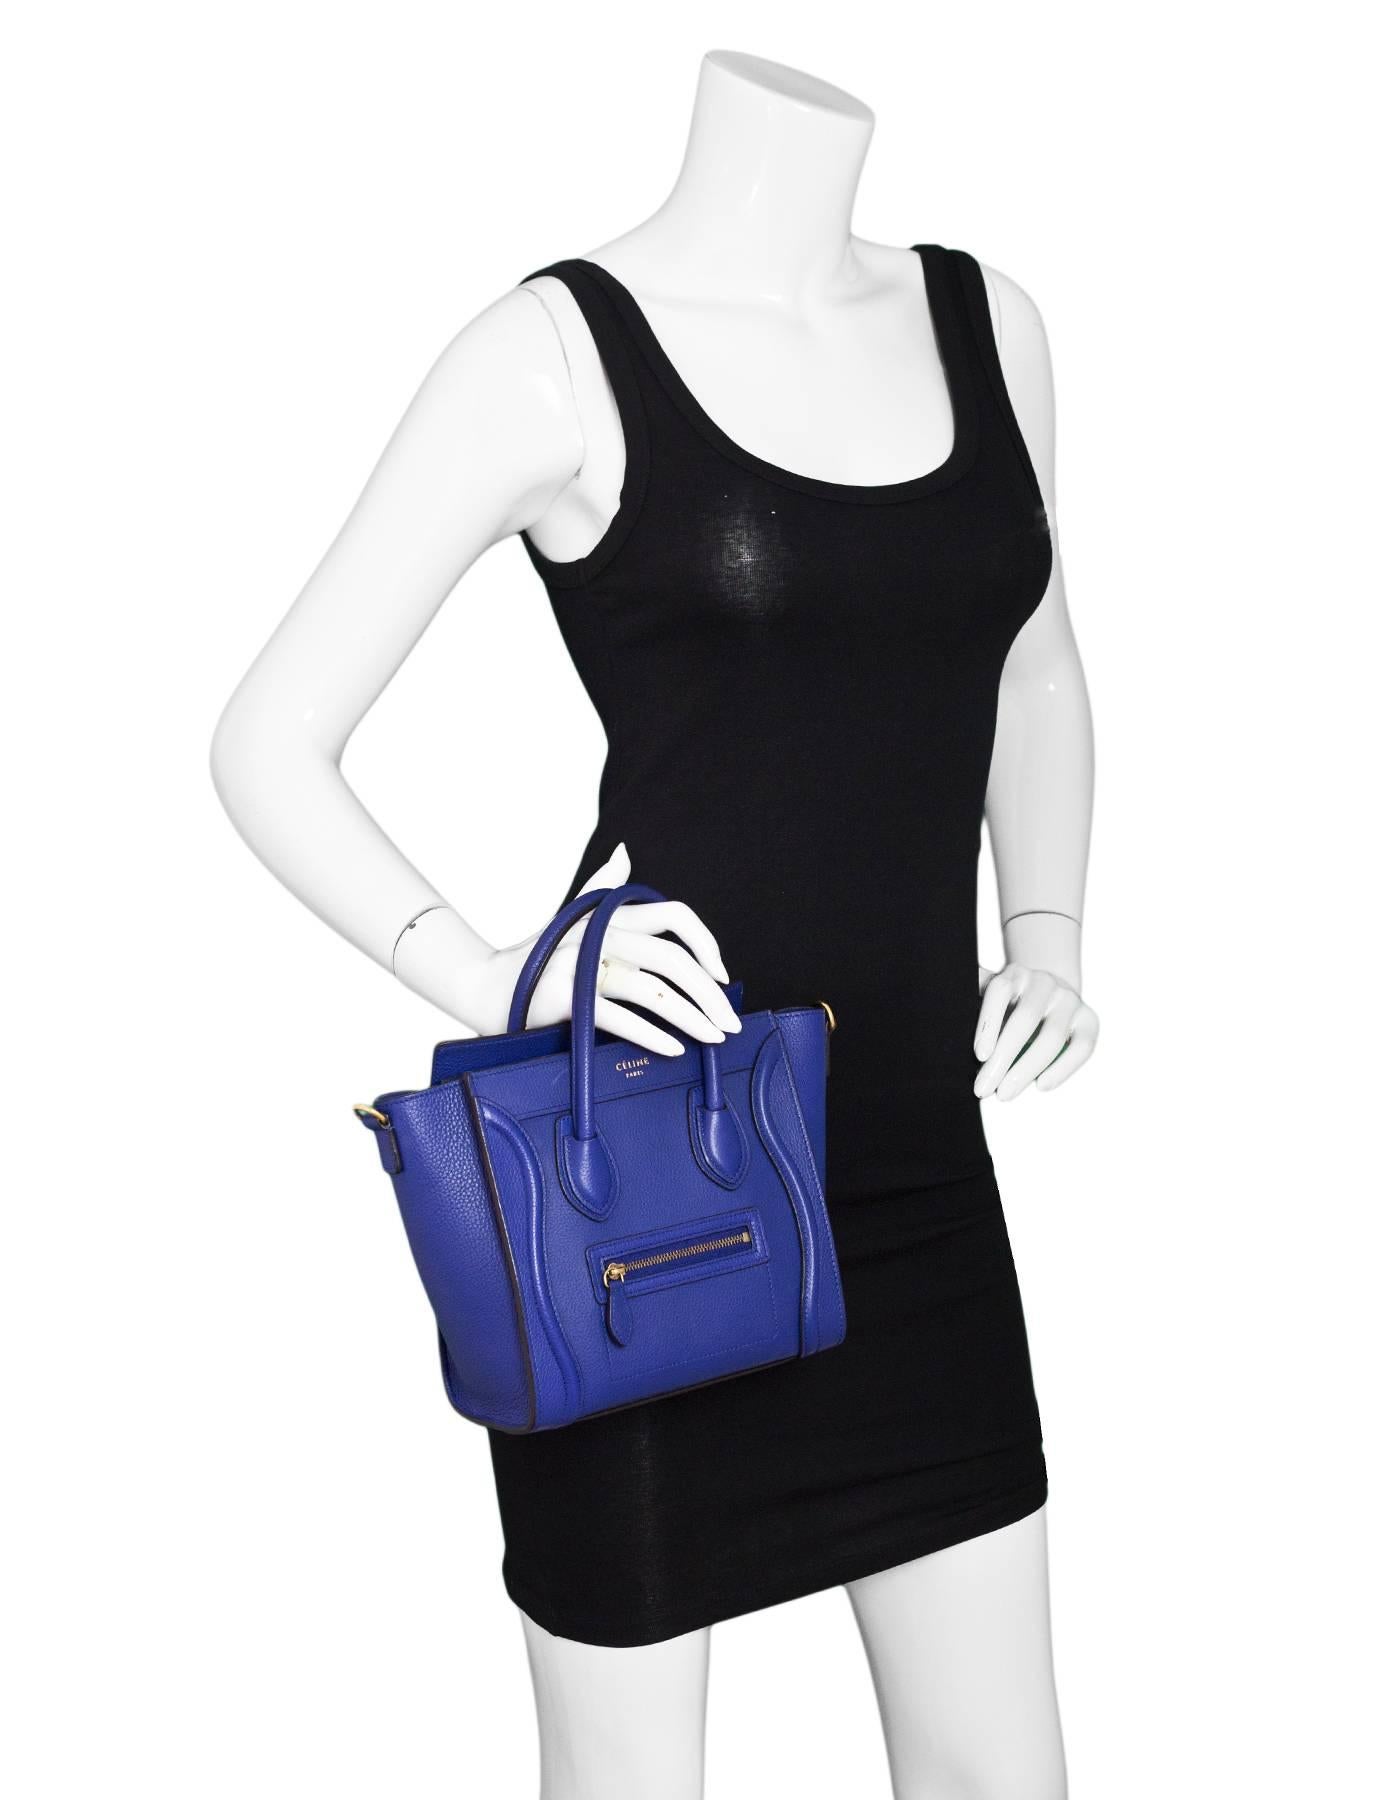 Celine Cobalt Blue Drummed Calfskin Nano Luggage Tote

Made In: Italy
Color: Cobalt blue
Hardware: Goldtone
Materials: Leather, metal
Lining: Blue suede
Closure/Opening: Zip top closure
Exterior Pockets: Front zip pocket
Interior Pockets: One wall